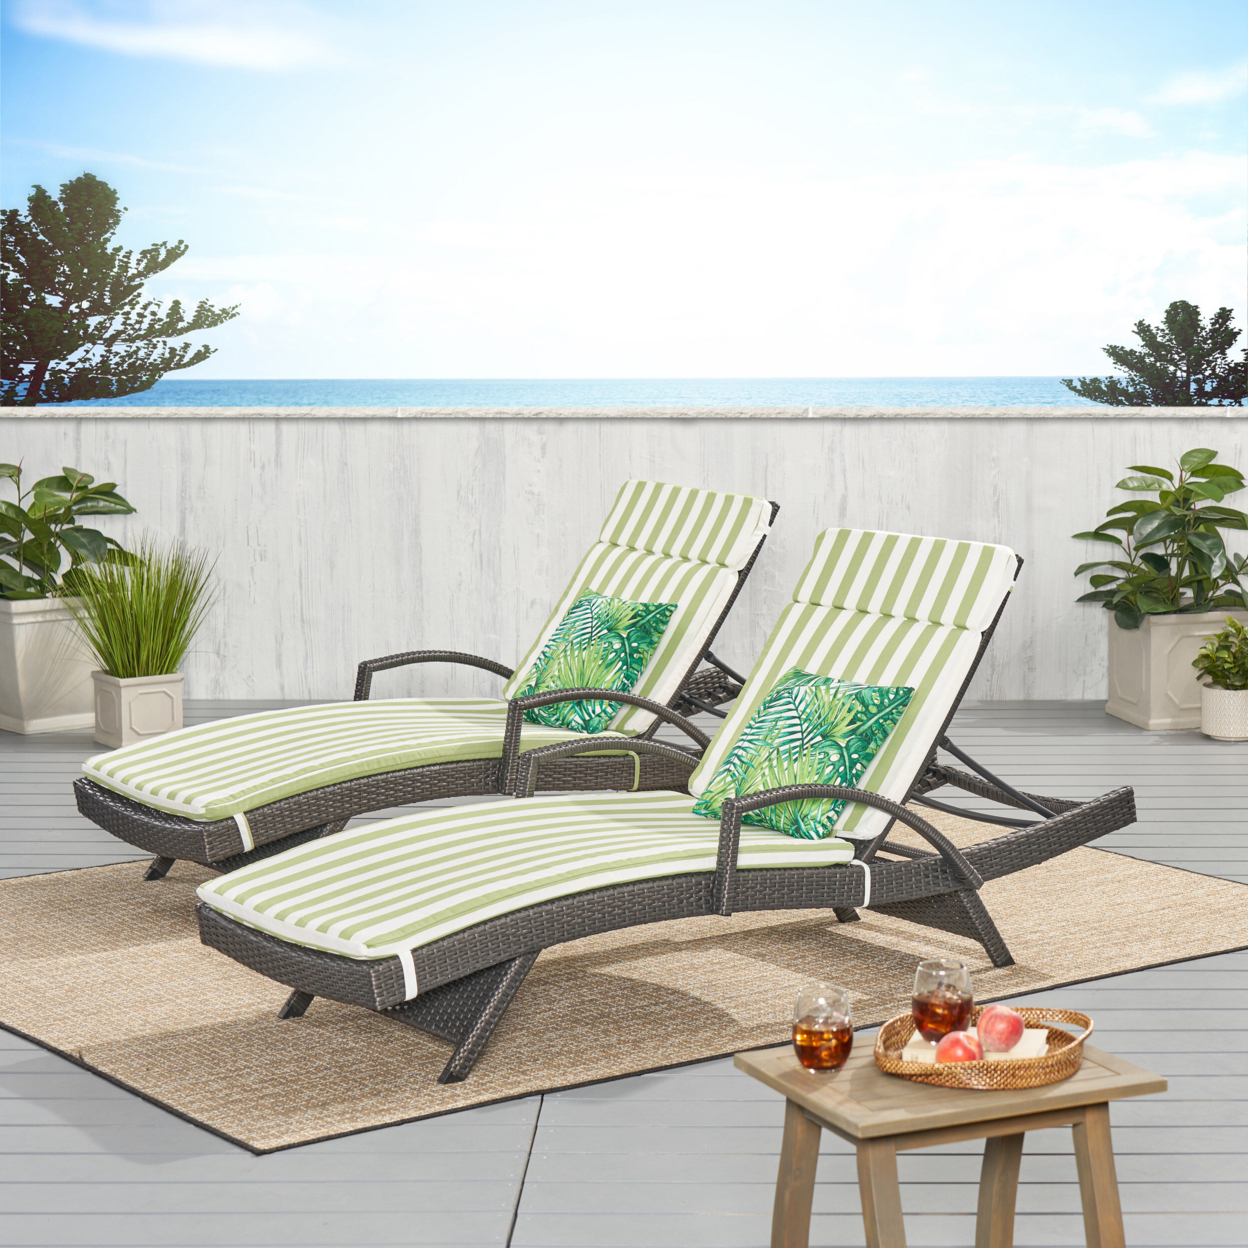 Soleil Outdoor Wicker Chaise Lounges With Water Resistant Cushions (Set Of 2) - Charcoal